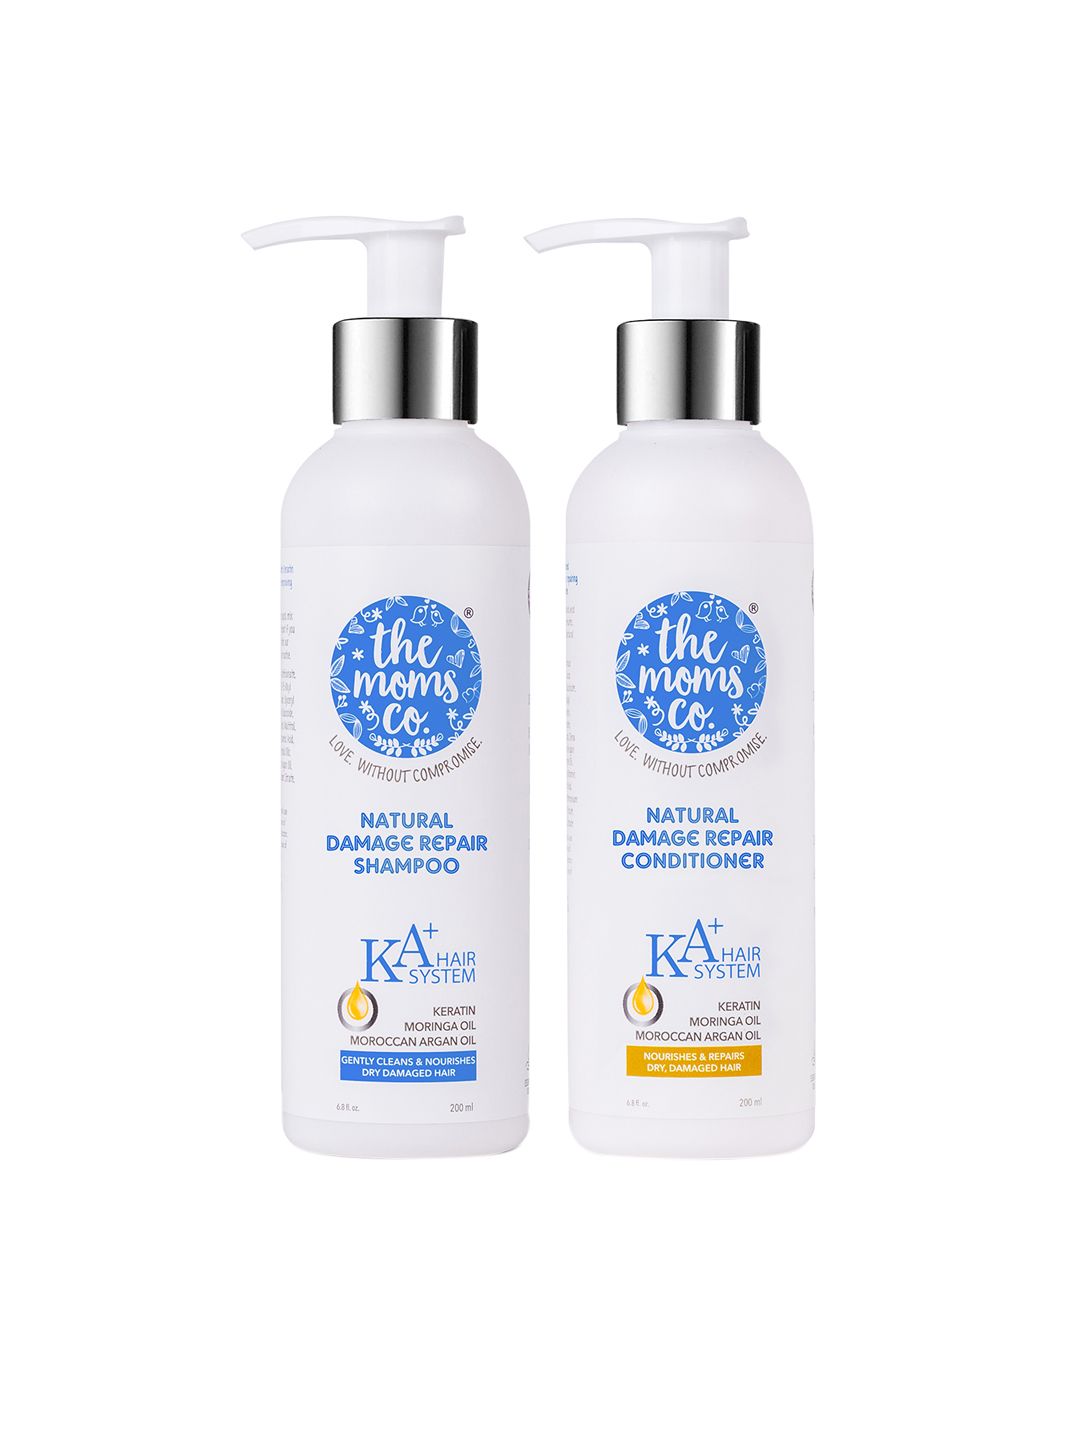 The Moms co. Natural Damage Repair Hair Shampoo & Conditioner - 200 ml Each Price in India